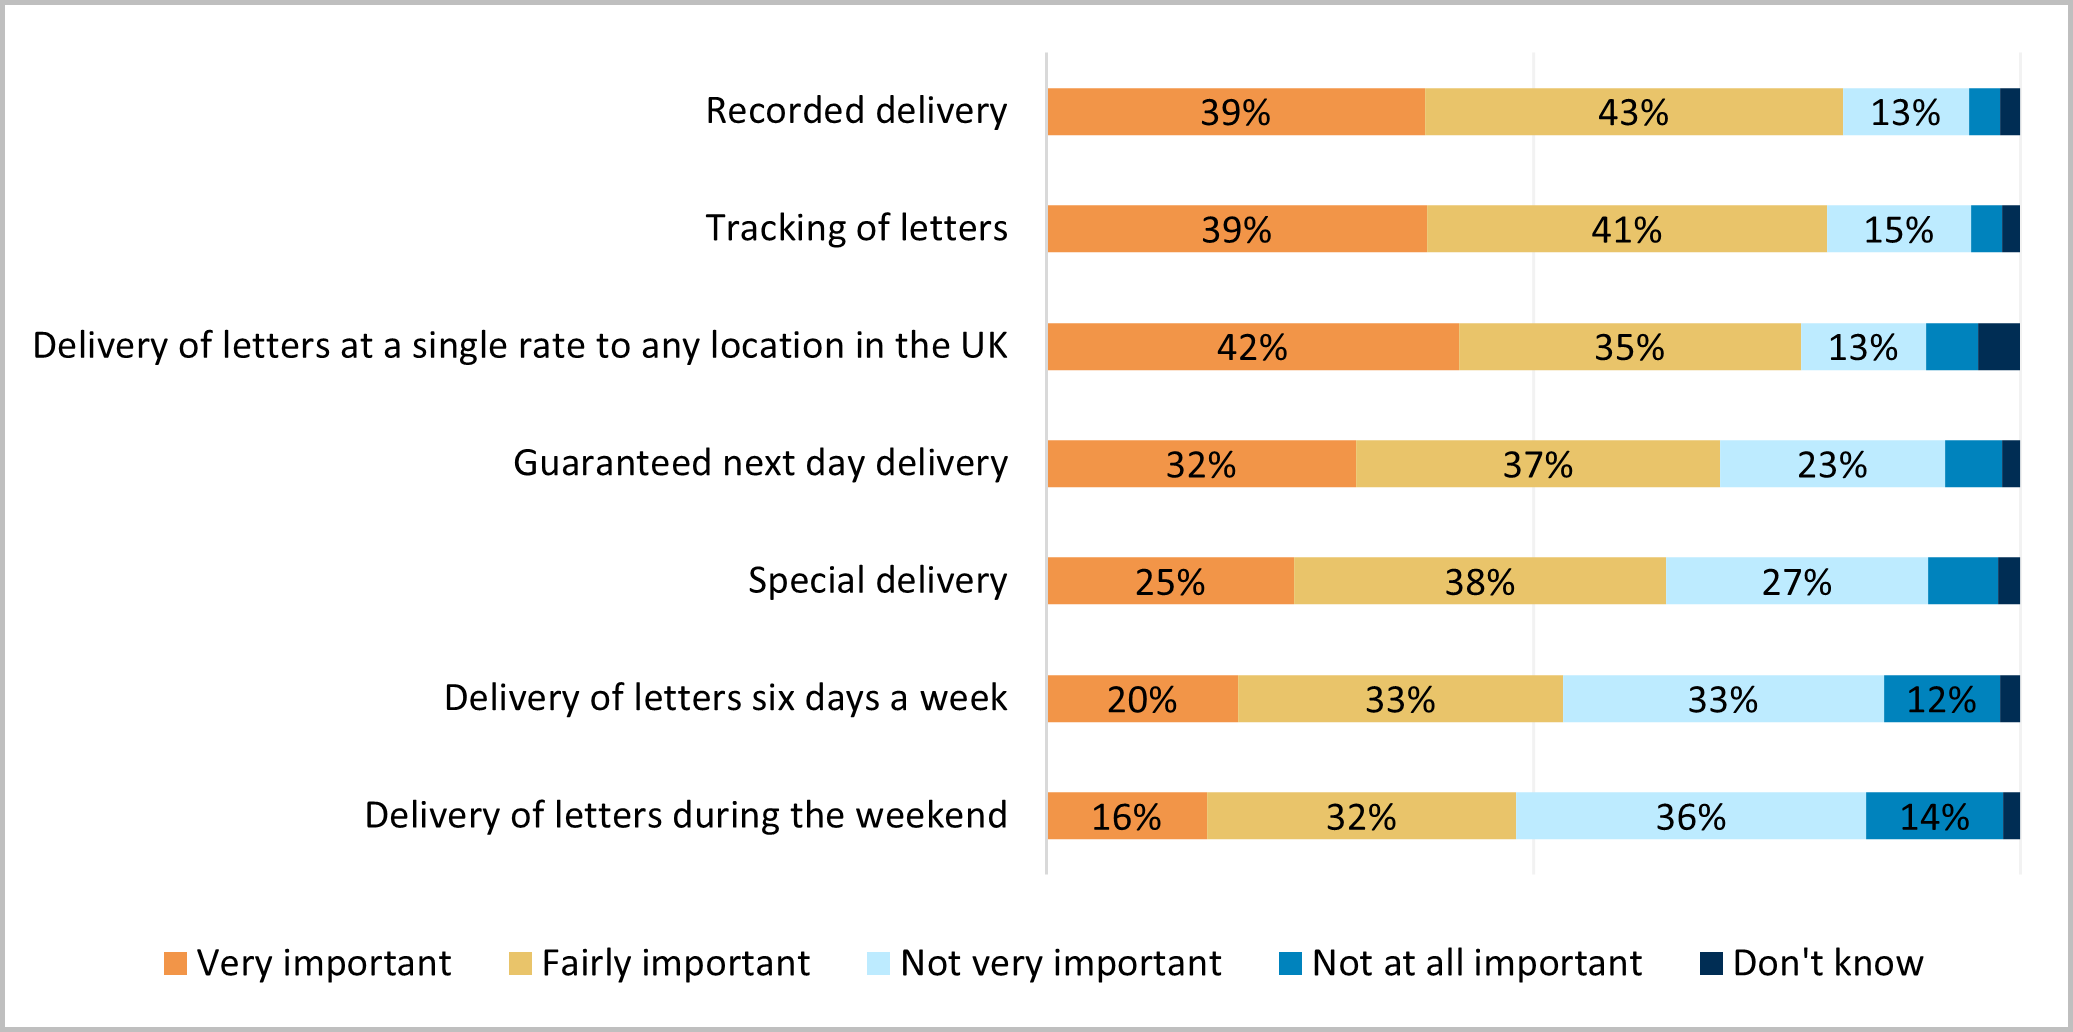 Figure 2 shows recorded delivery, tracking of letters and delivery at a single rate to any location in the UK are the three most important aspects for consumers. These were followed by guaranteed delivery, special delivery, with delivery of six days and weekend delivery rated as the least important aspects. 